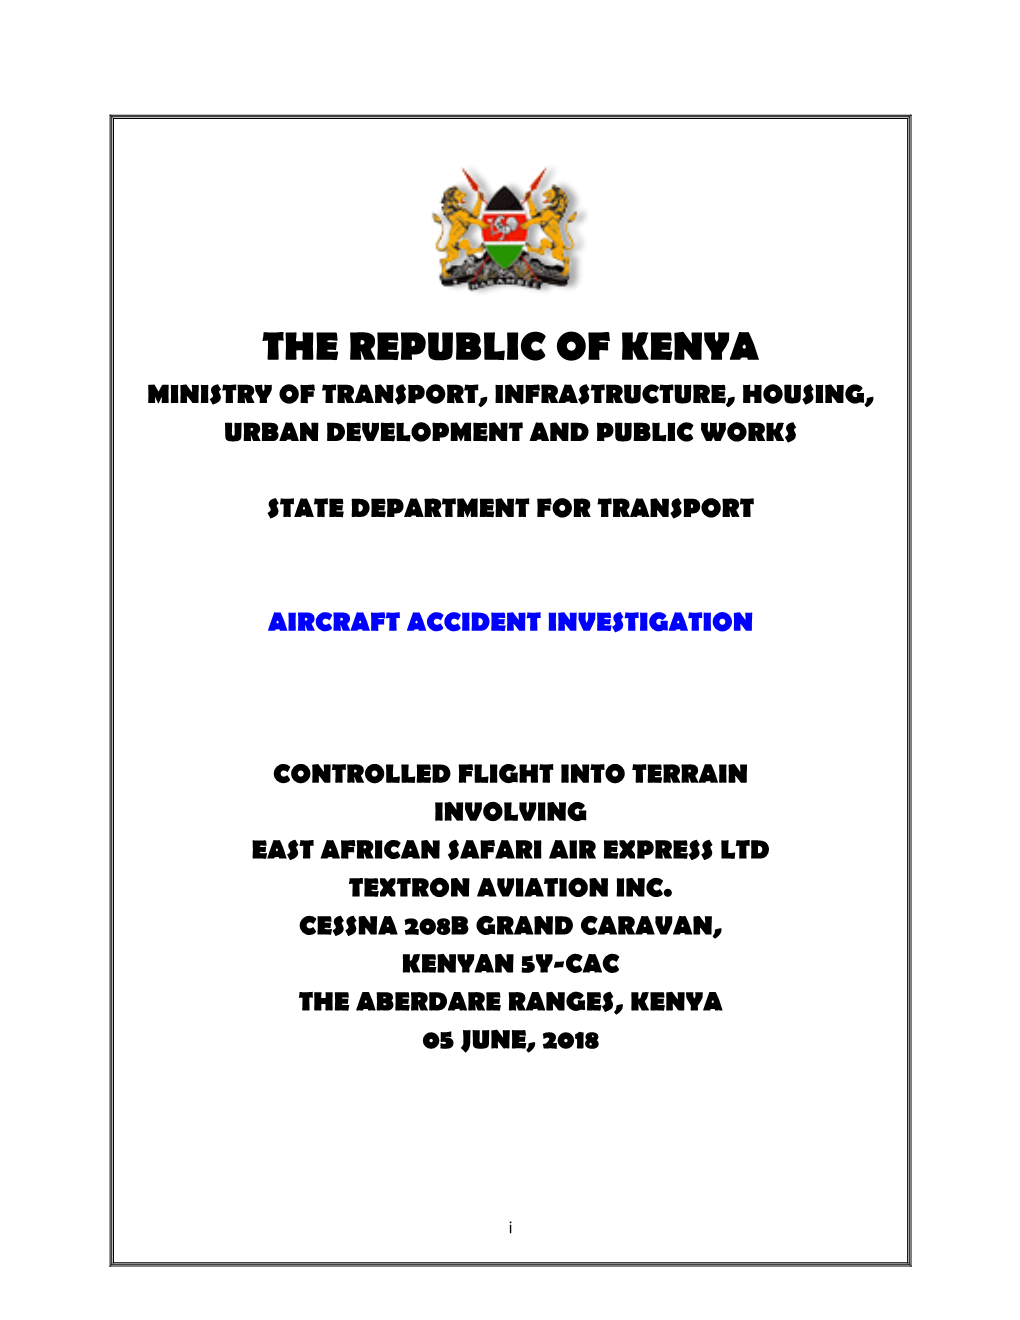 The Republic of Kenya Ministry of Transport, Infrastructure, Housing, Urban Development and Public Works